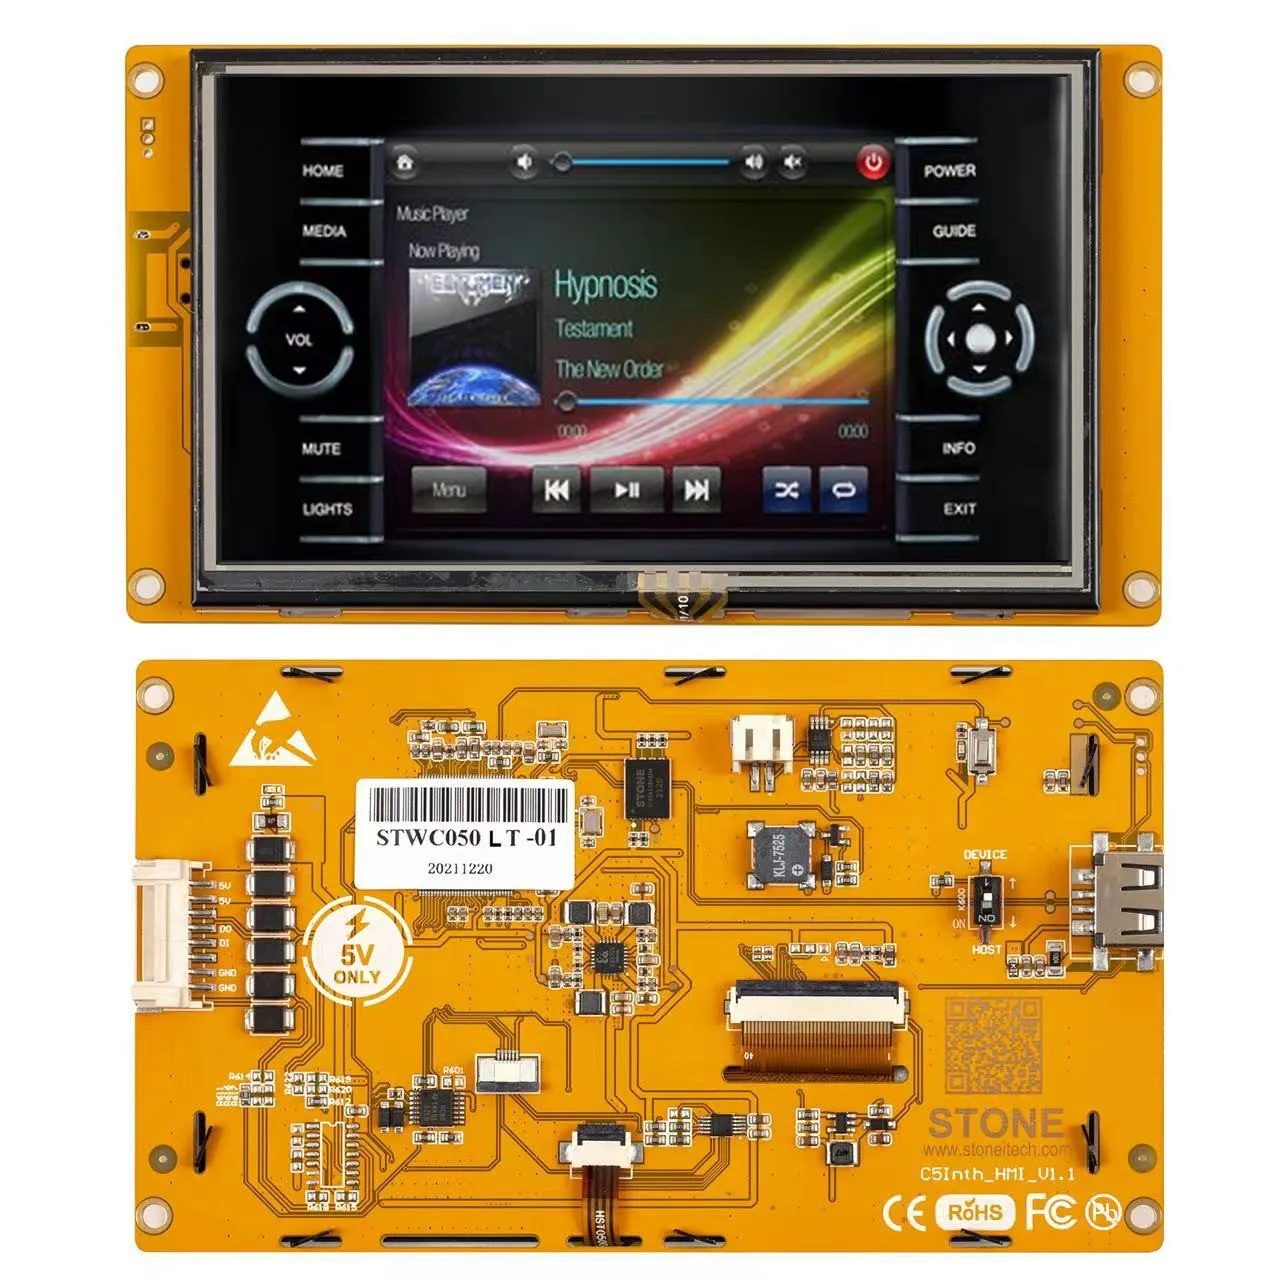 5.0 TFT HMI Driver passed CE/RoHS/FCC/ISO9001 International Certification and 24 hours Aging Testing offer professional